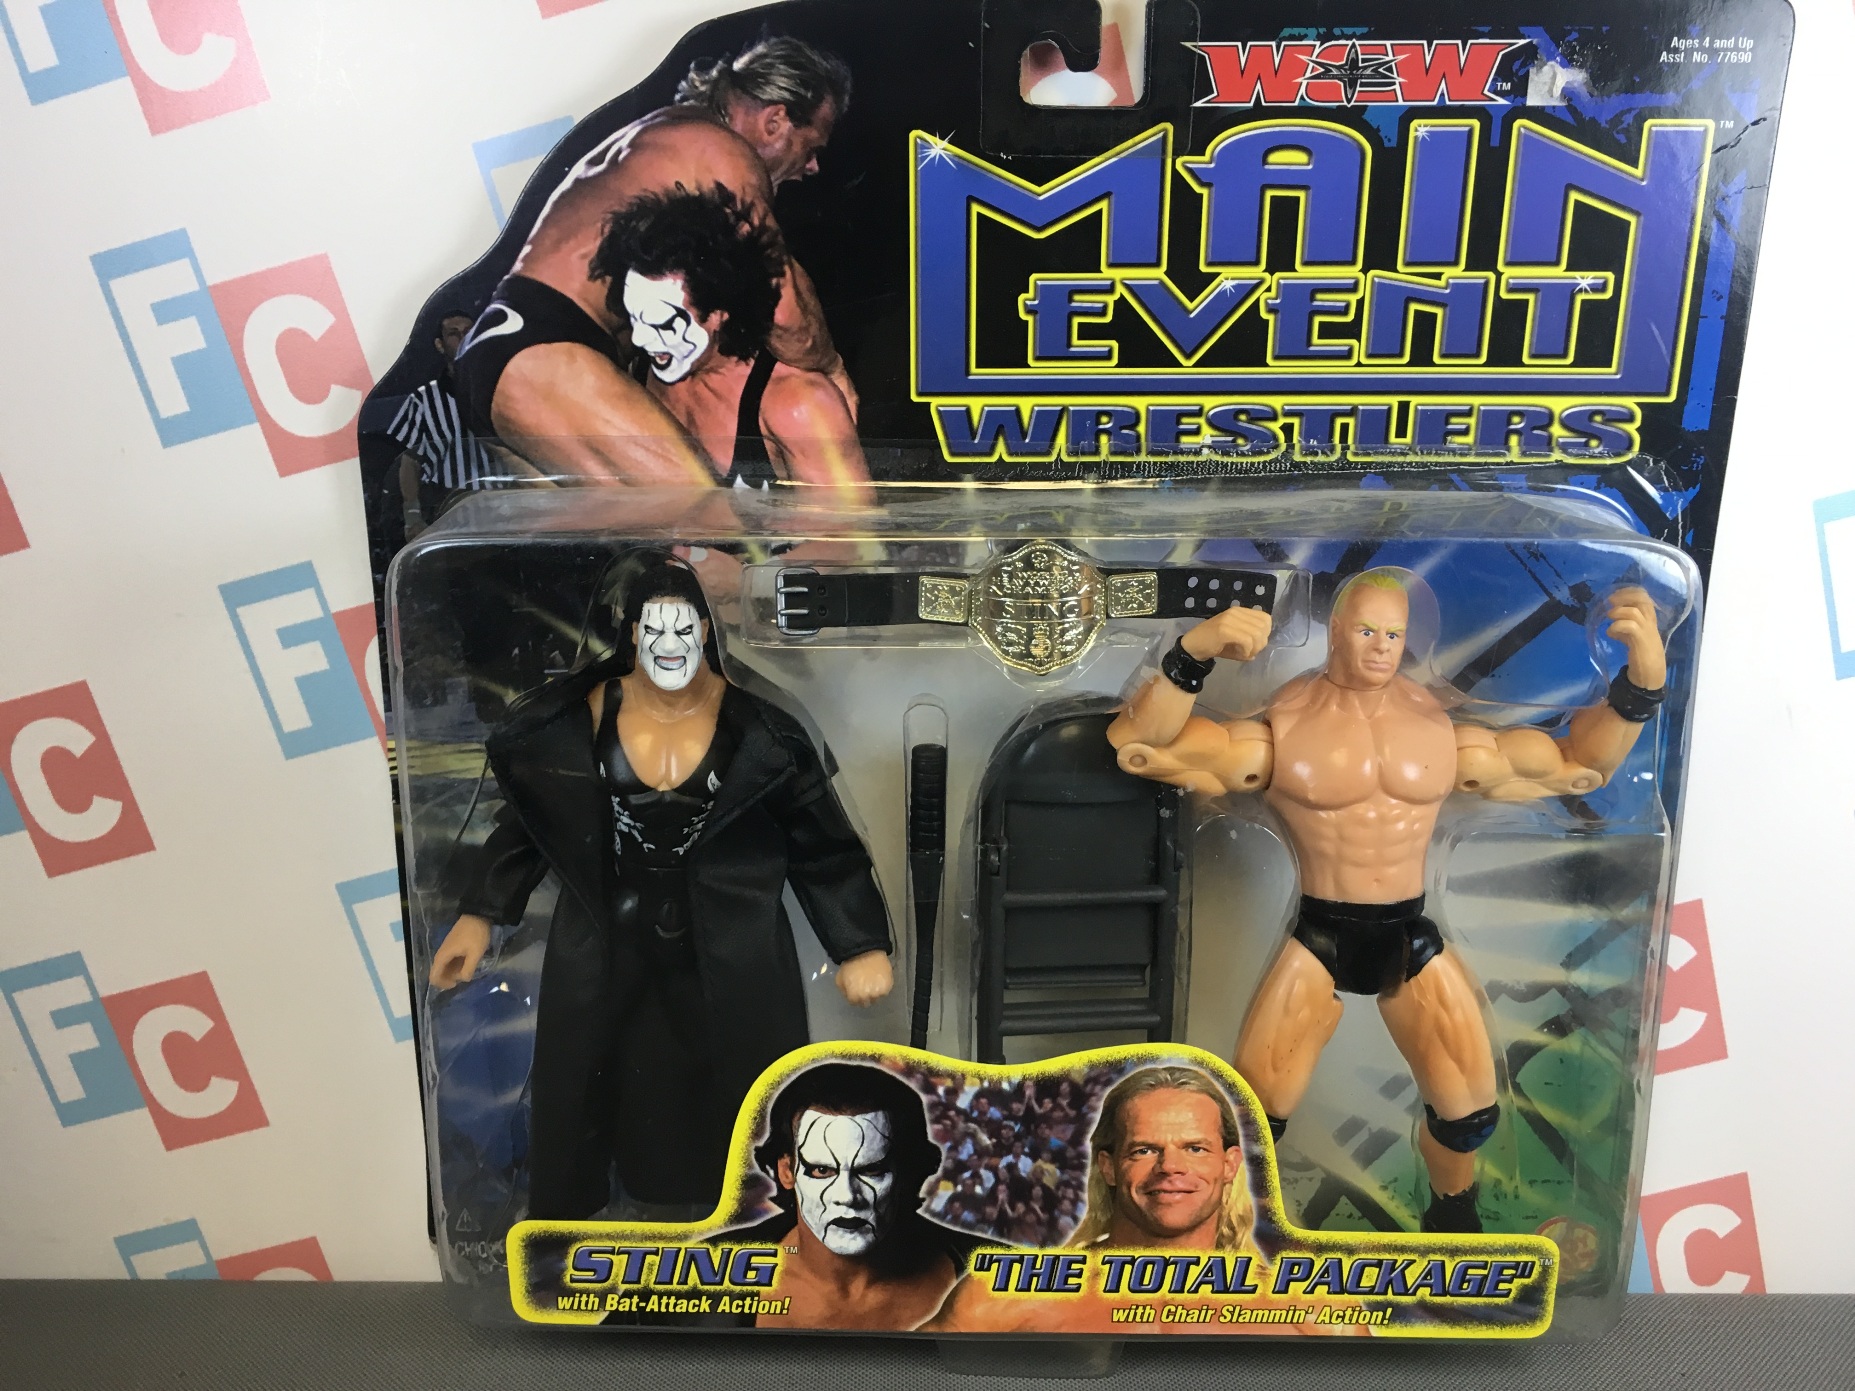 Sting and Lex Luger